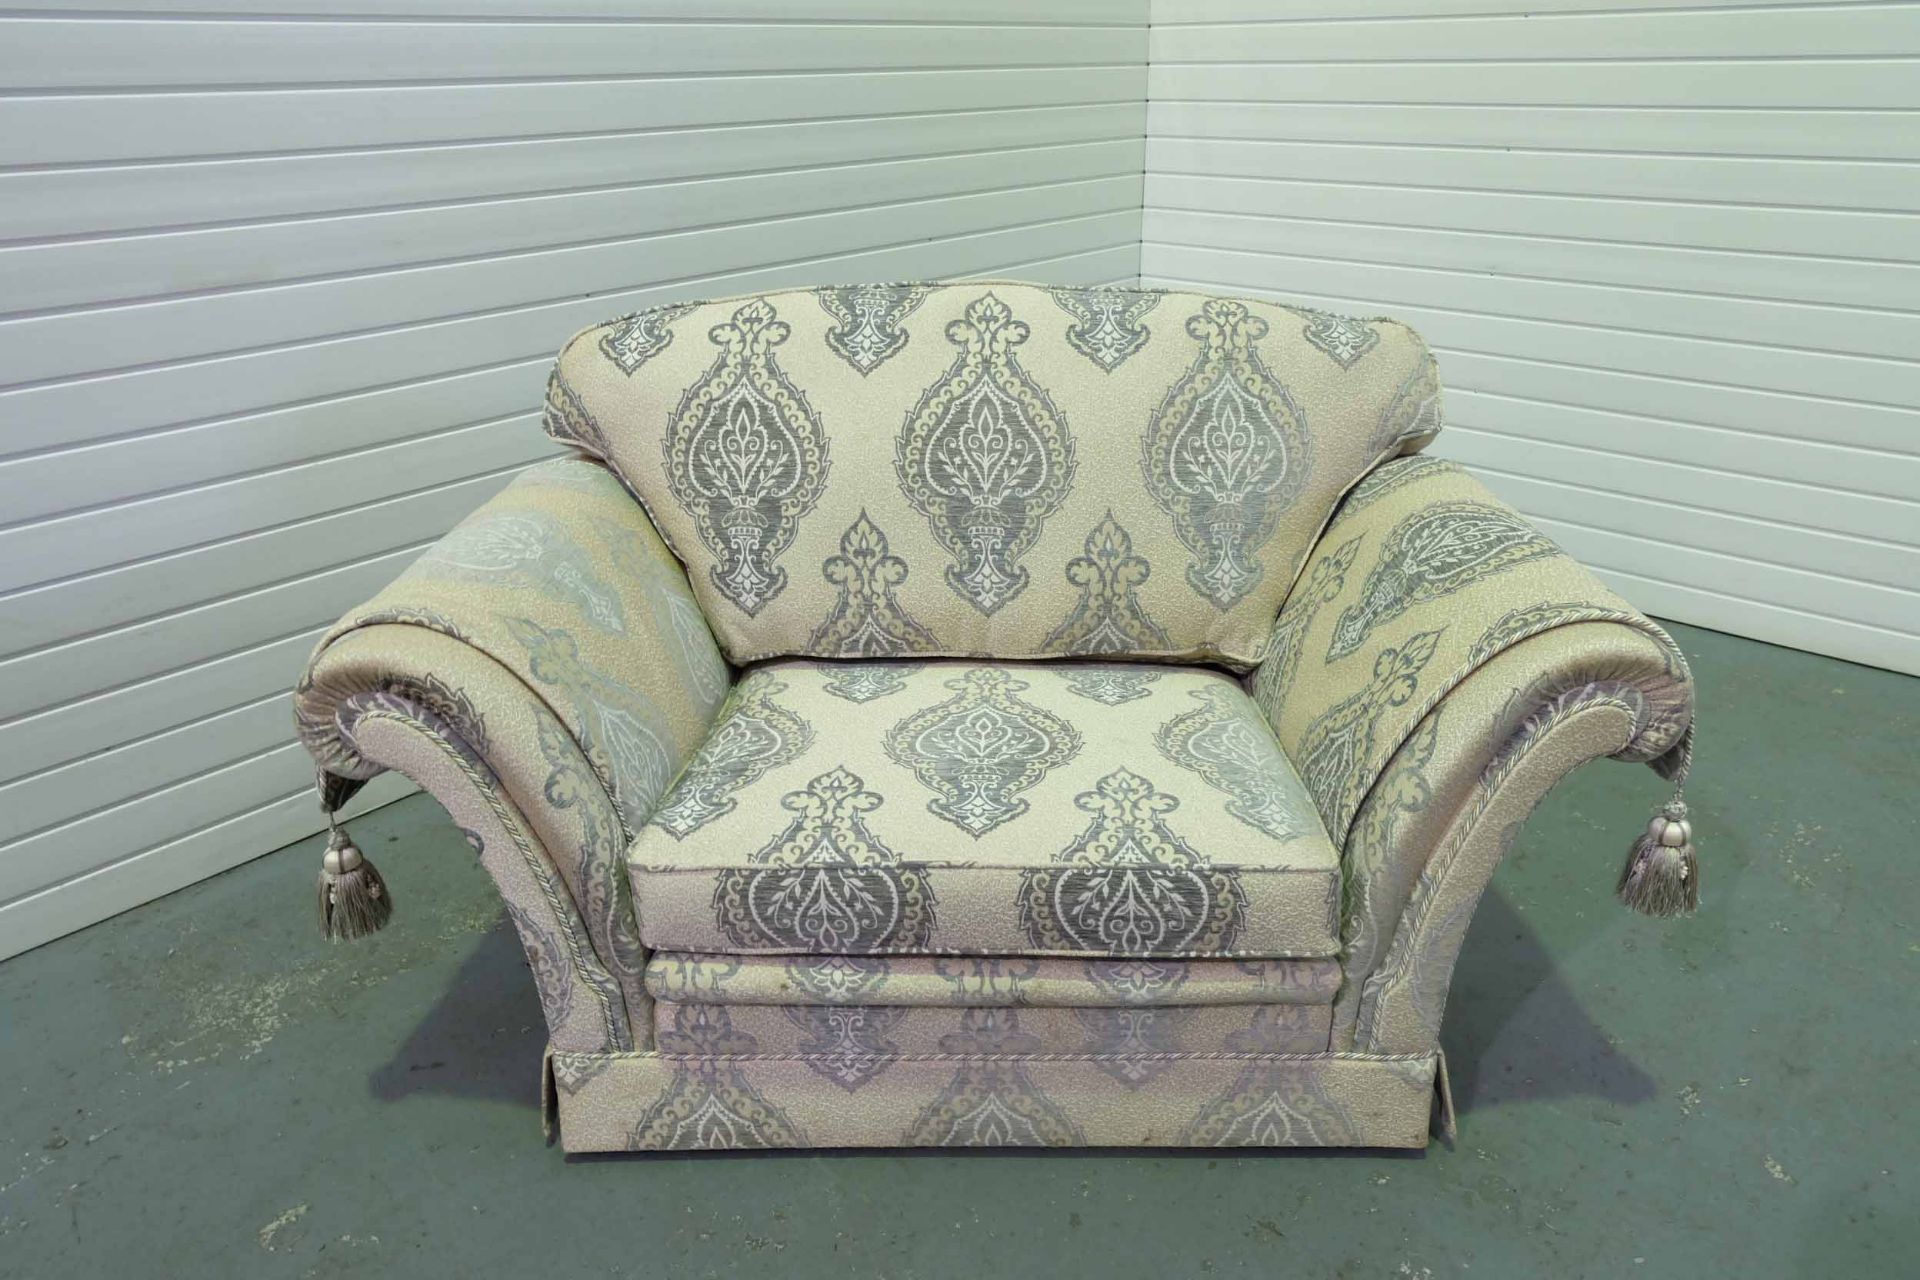 Steed Upholstery 'Kedleston' Range Fully Handmade Large 1.5 Seater Chair. With Valance & Arm Throws.